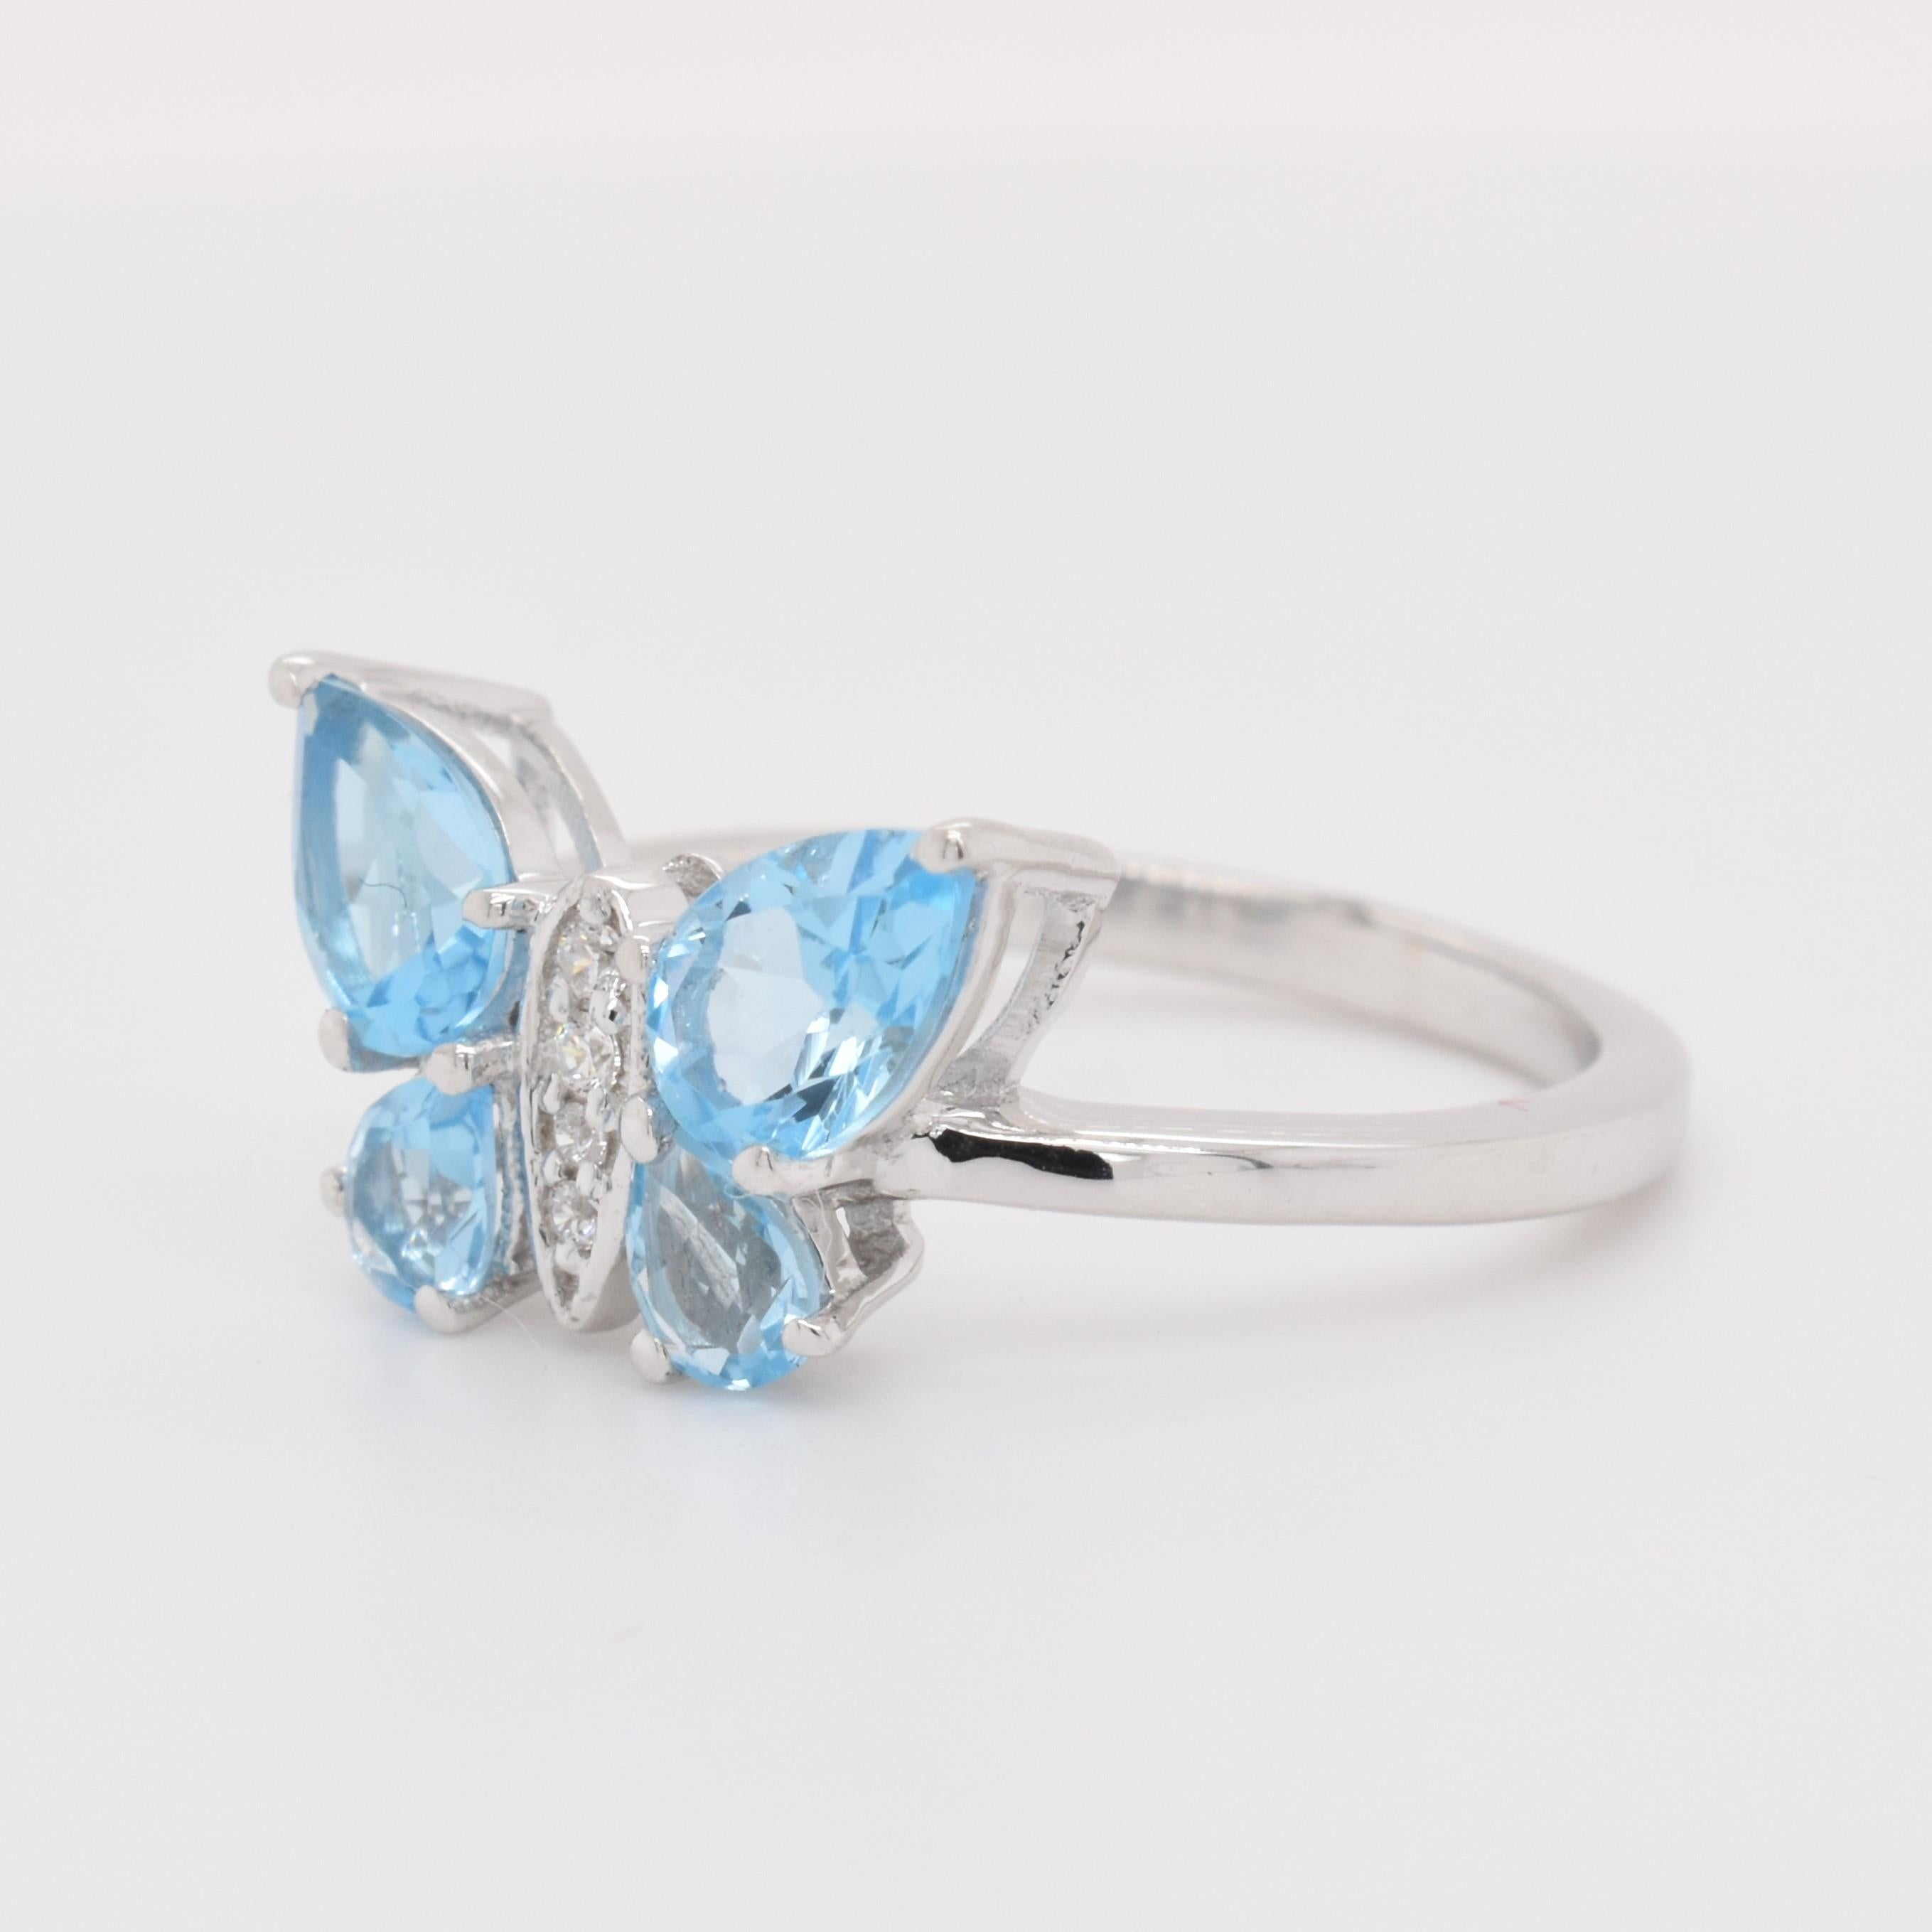 Pear Shape Swiss Blue Topaz Gemstone beautifully crafted with CZ in a Ring. A fiery Blue color December Birthstone. For a special occasion like Engagement or Proposal or may be as a gift for a special person.

Primary Stone Size - 6x4 & 4x3 mm